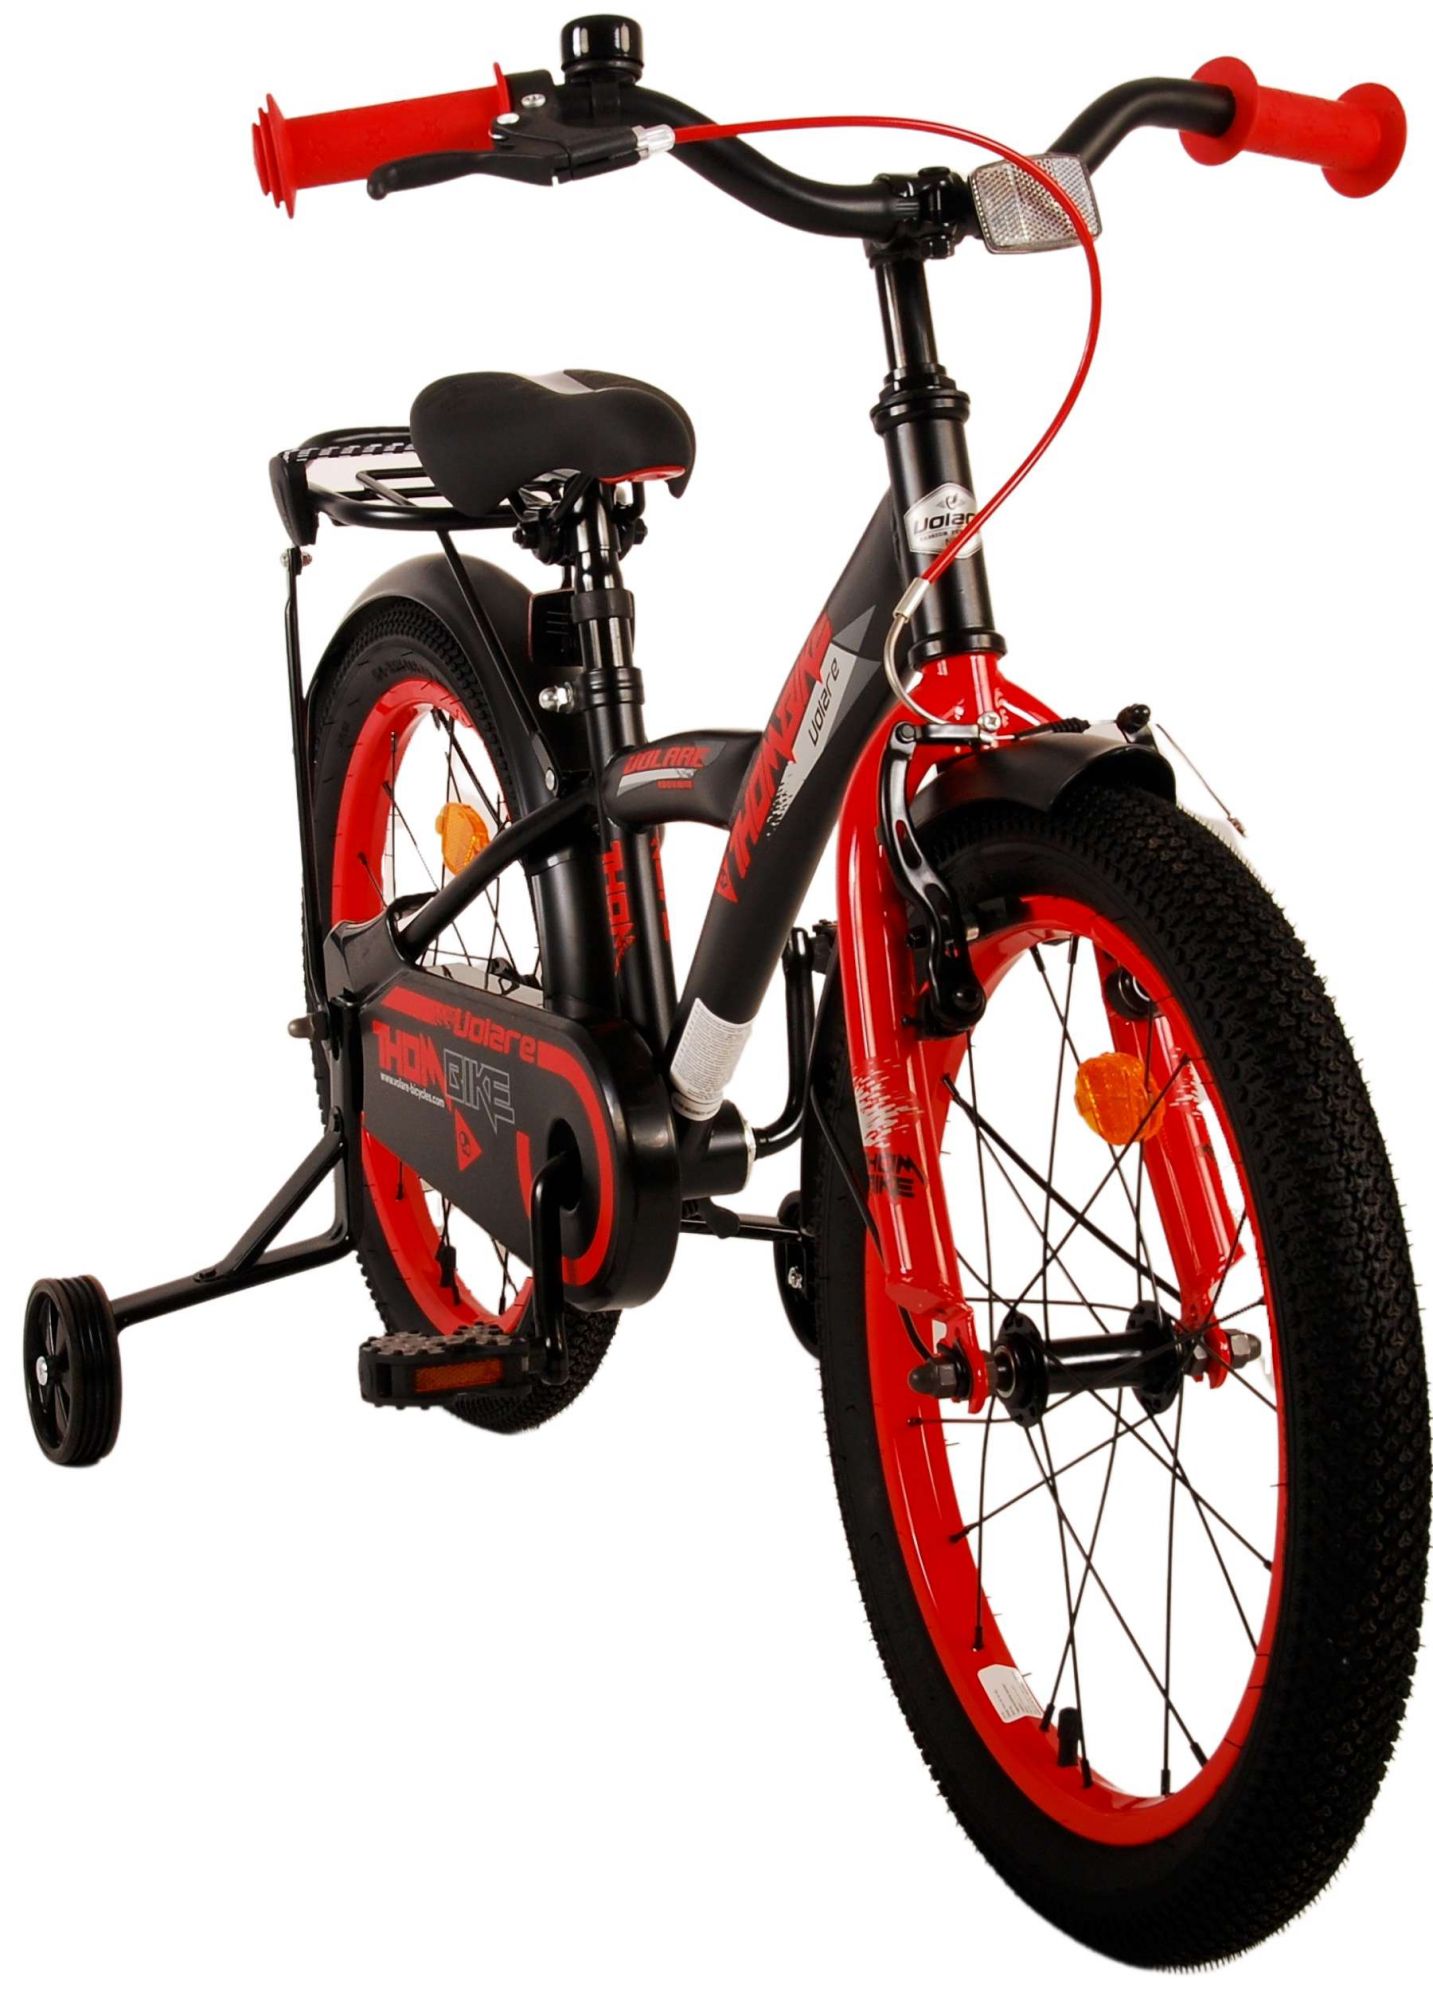 Thombike_18_Inch_Rood_-_9-W1800